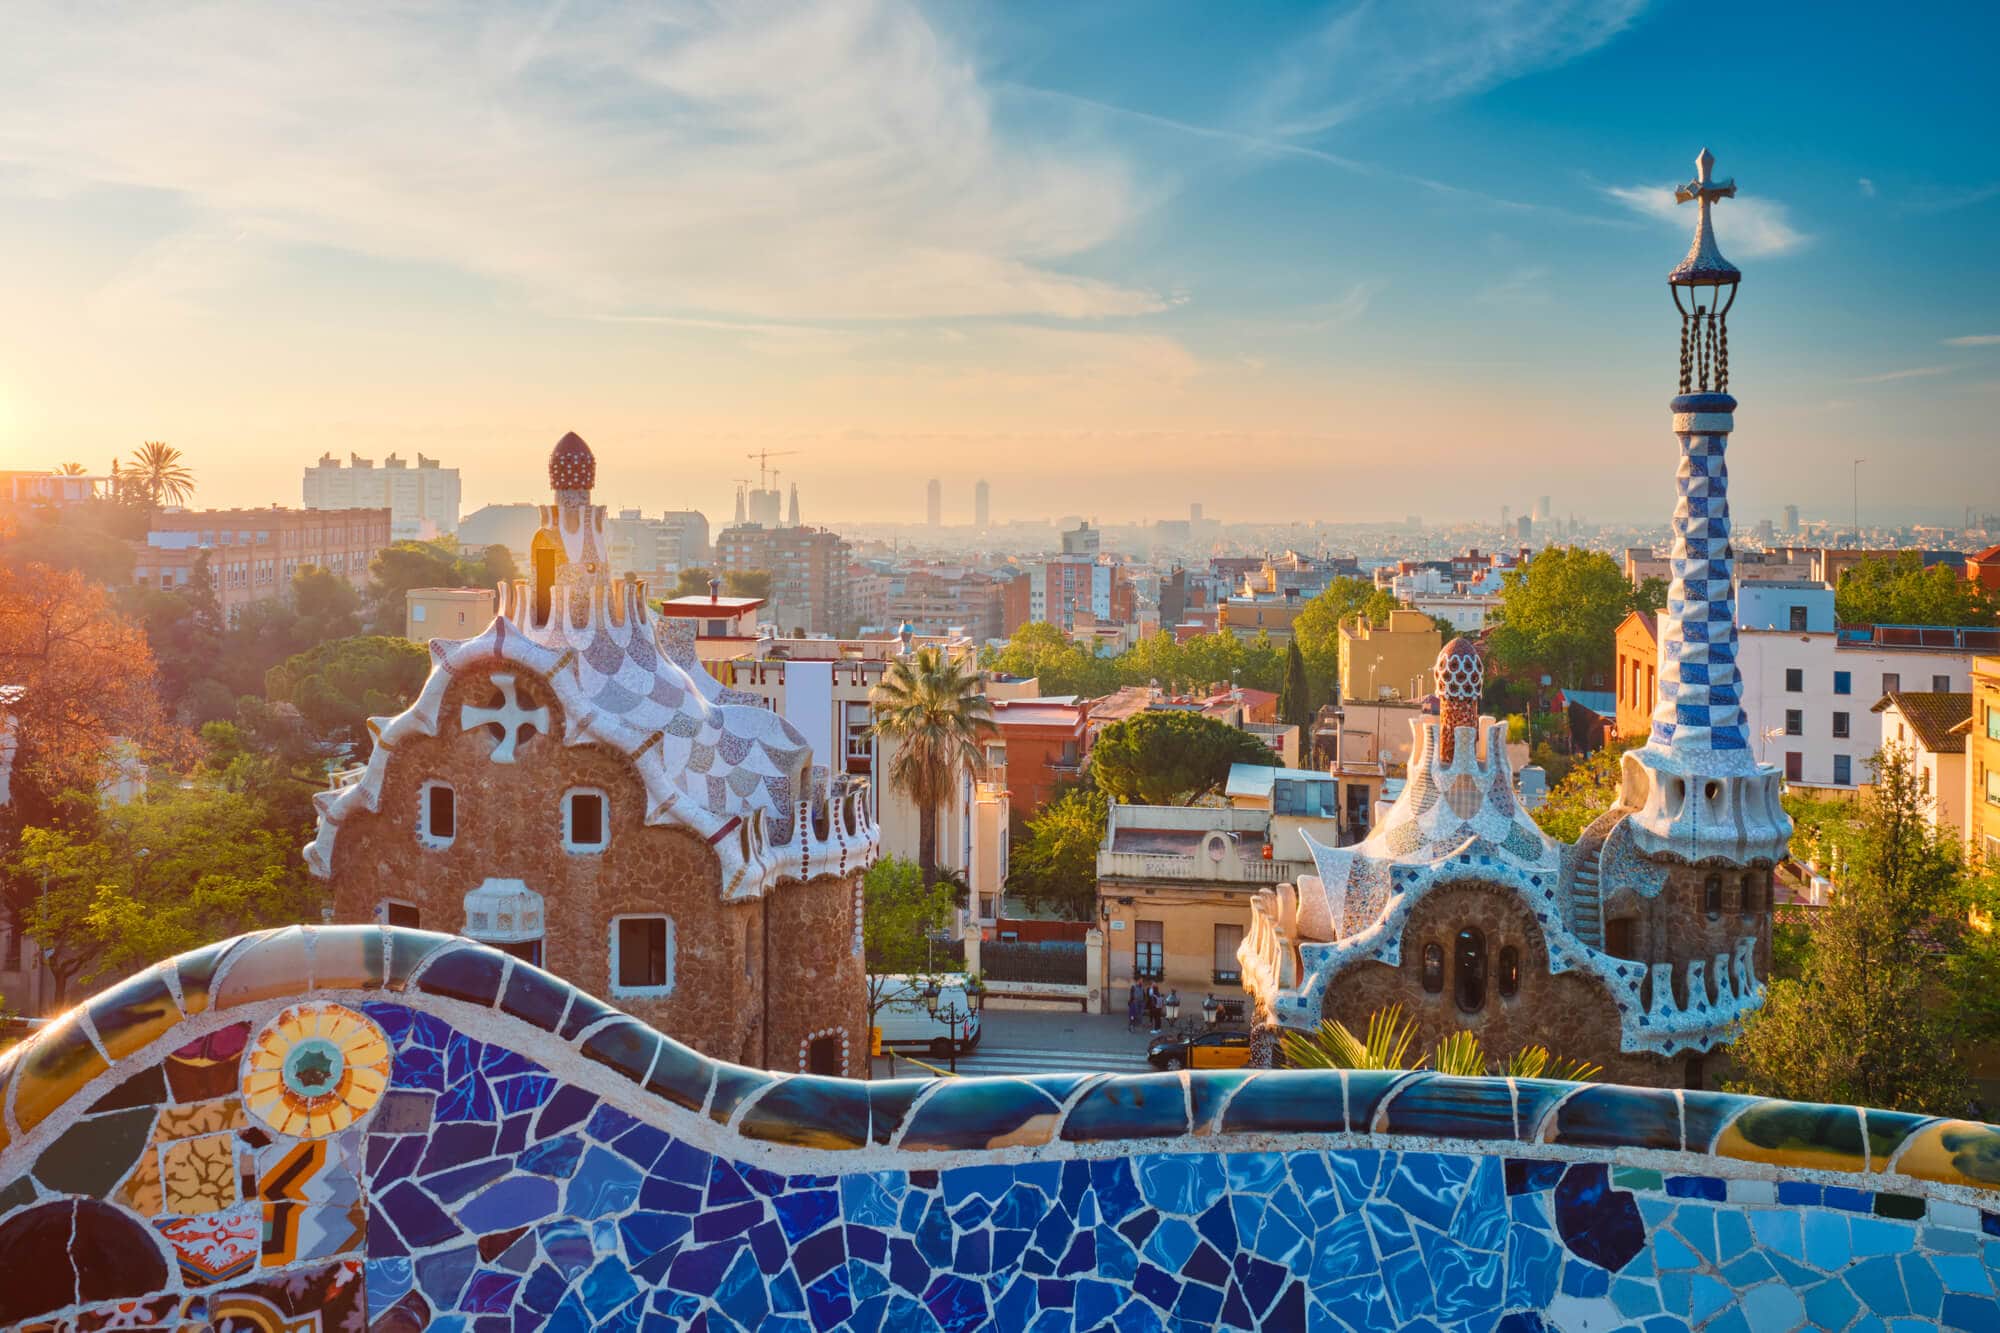 Early morning looking out over Parc Güell, on a shore excursion from Barcelona Cruise Port.